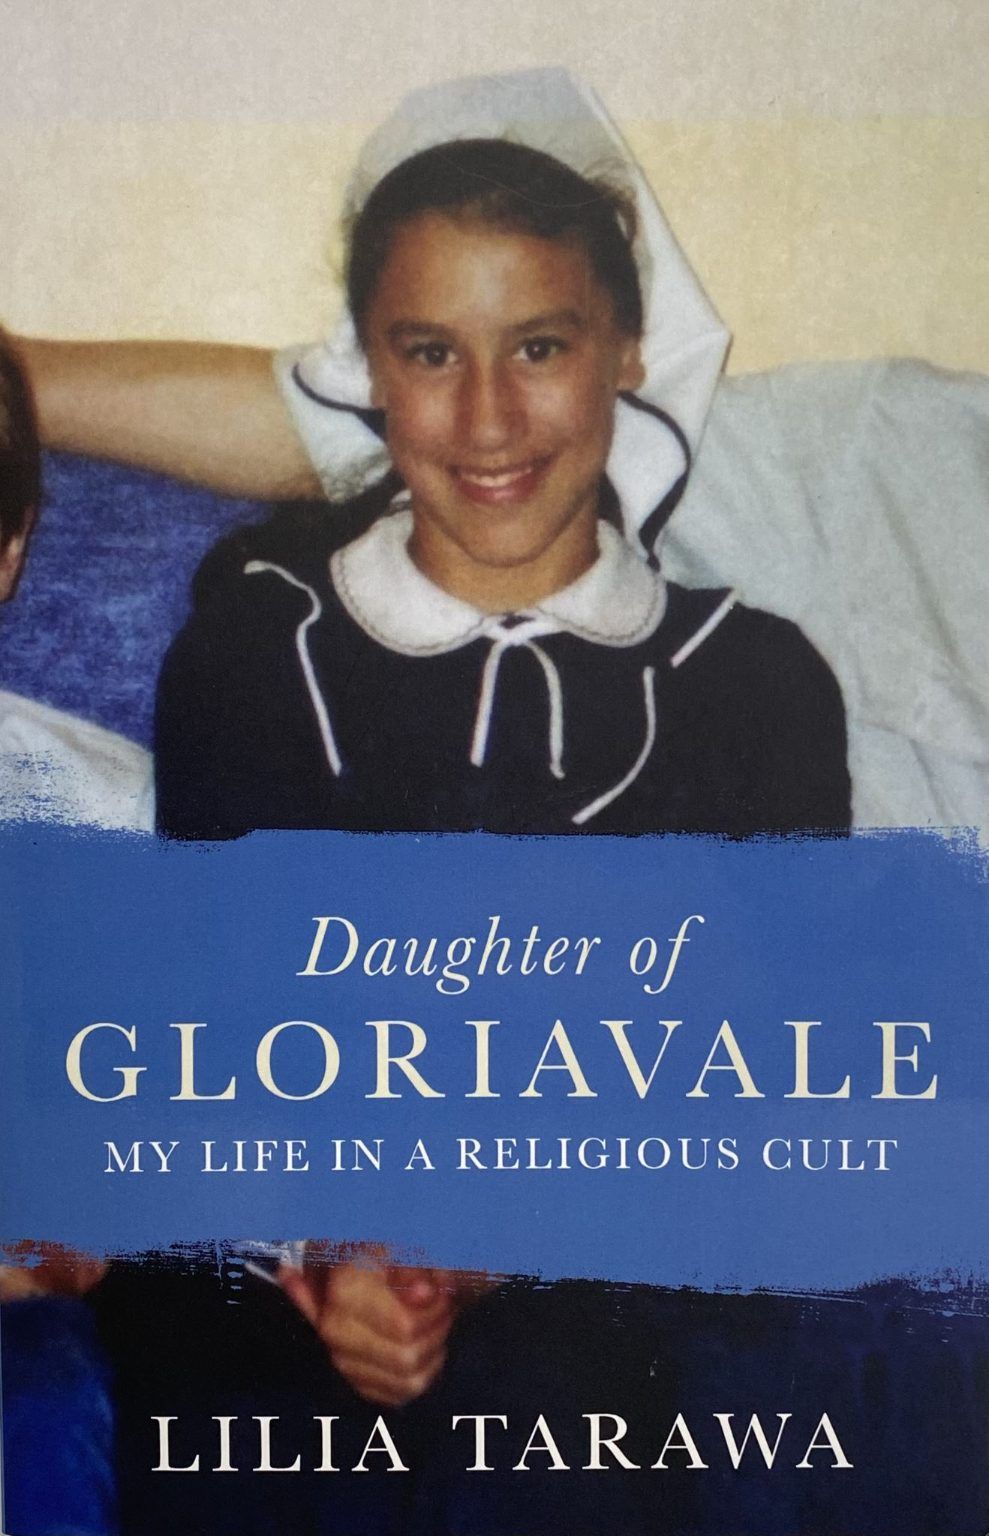 DAUGHTER OF GLORIAVALE: My life in a Religious Cult